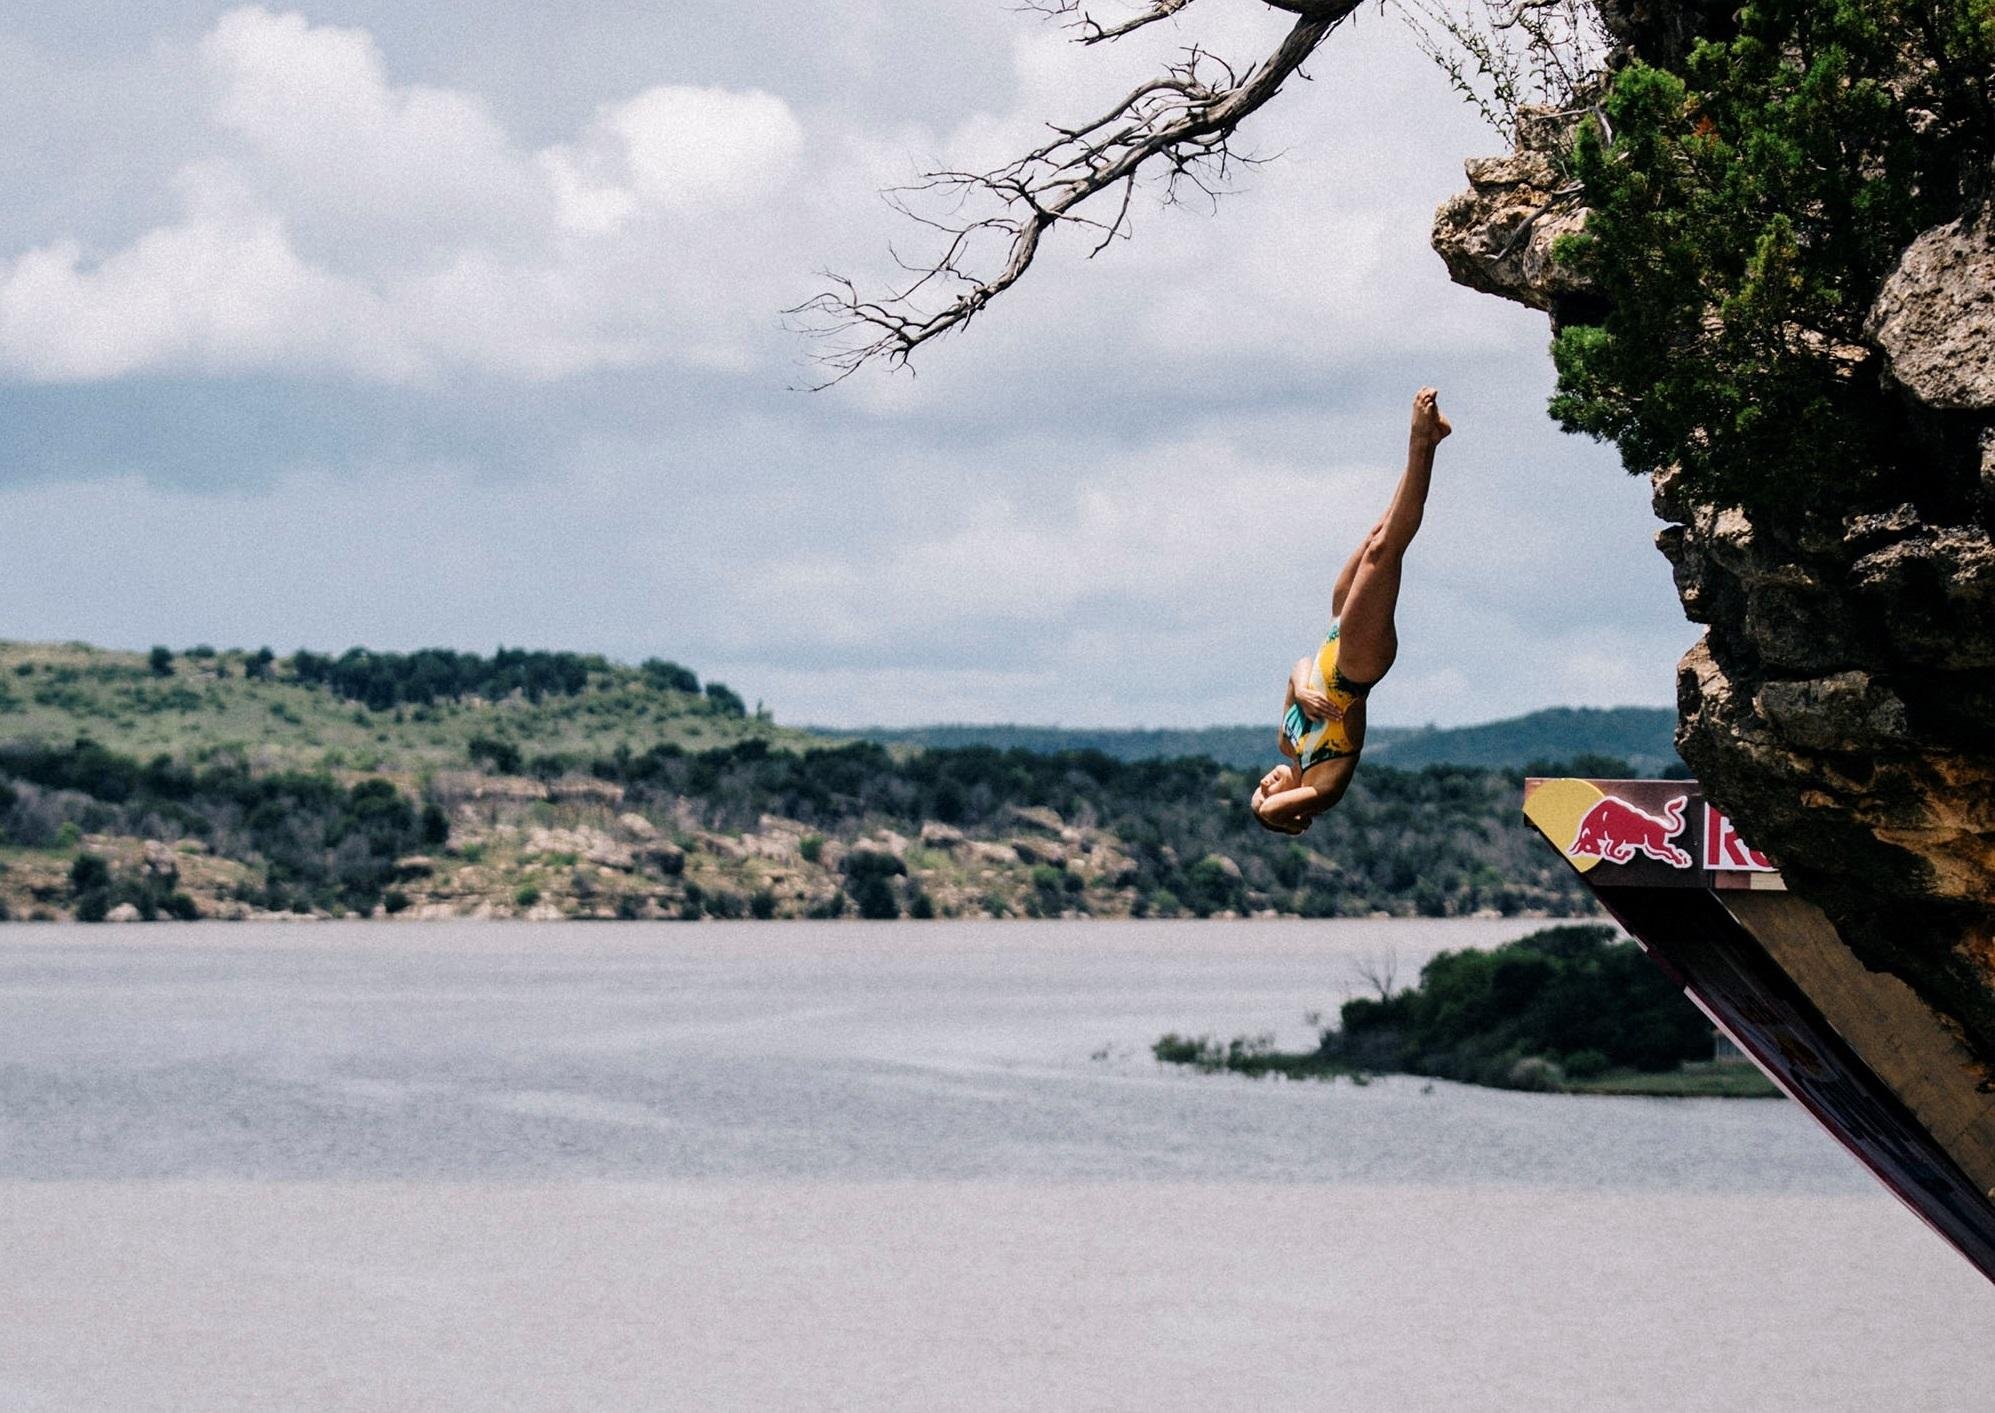 Wildcard competitor Rhiannan Iffland claims cliff diving top spots.